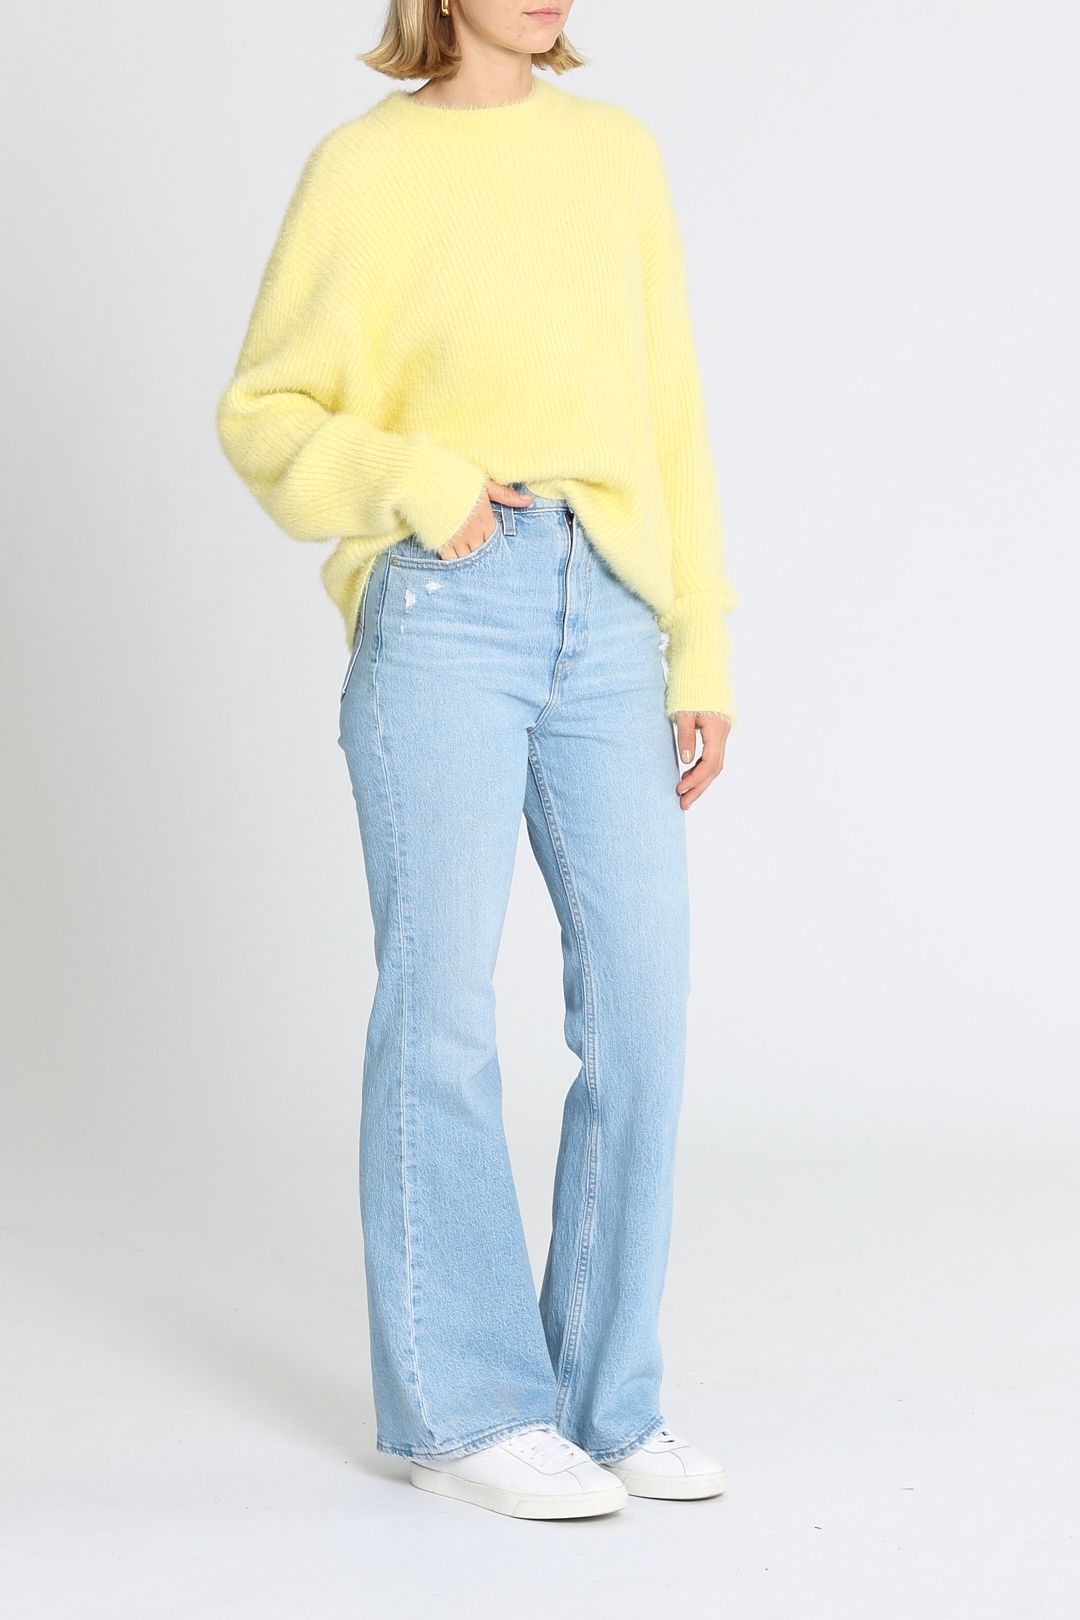 C&M Camilla and Marc Caprani Sweater Lemon Relaxed